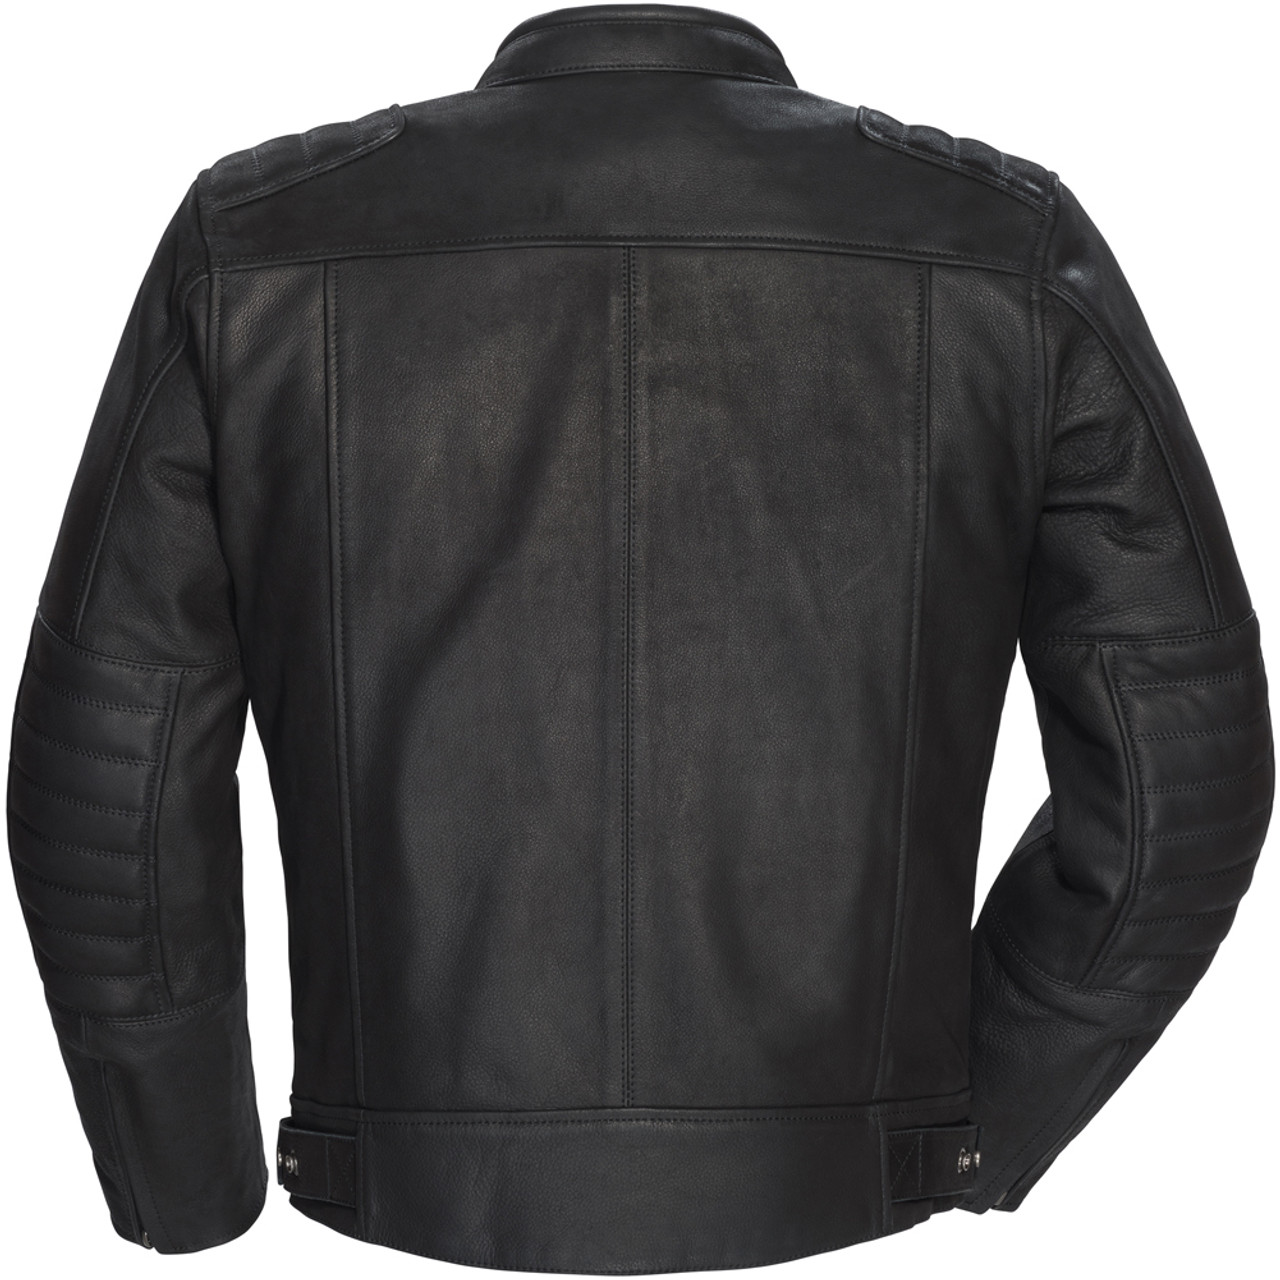 Tourmaster Blacktop Leather Jacket with Hood - Sportbike Track Gear